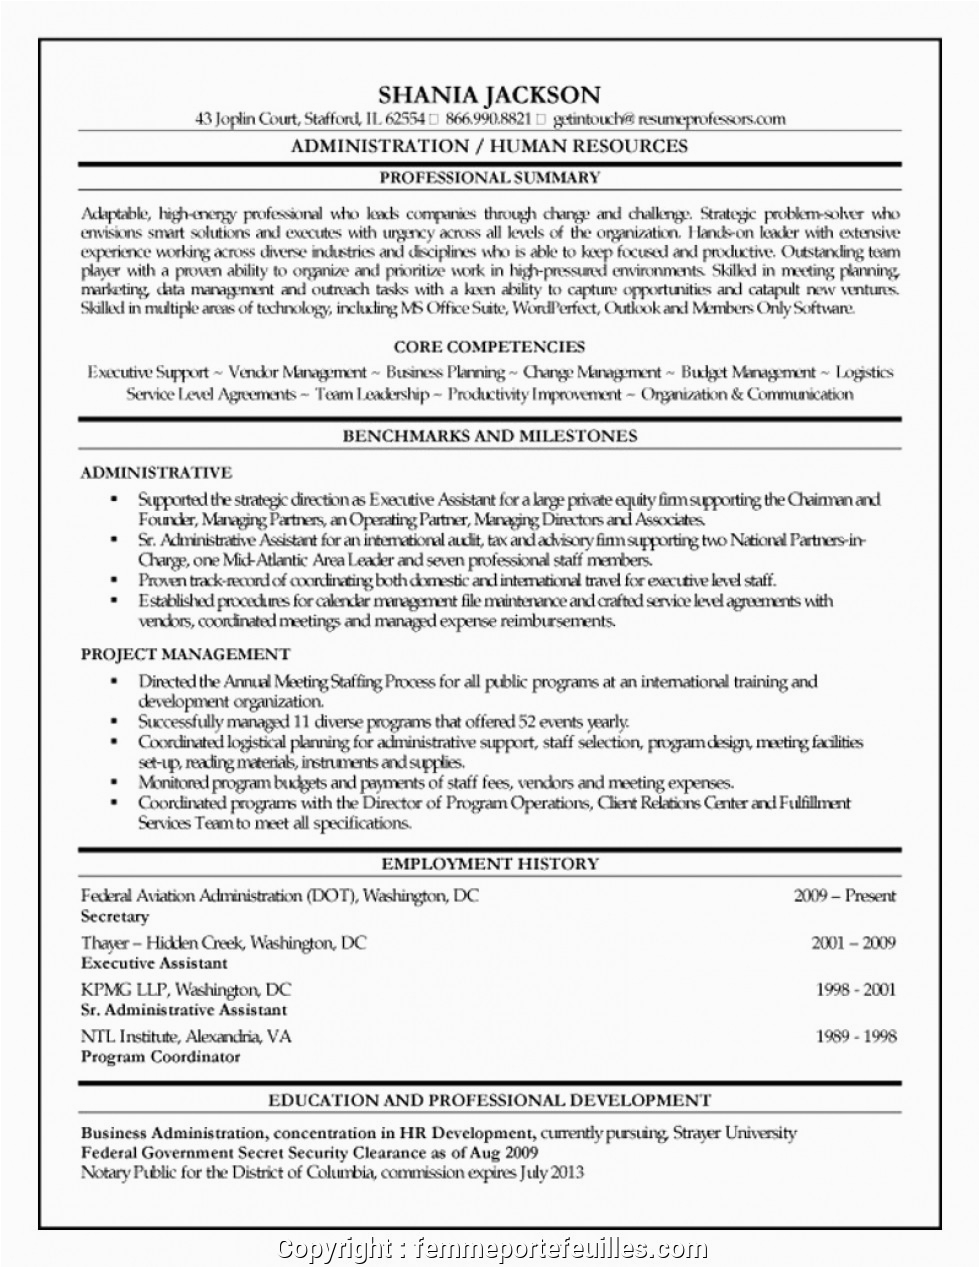 Human Resources Resume Sample Entry Level Simply Entry Level Human Resources Resume Entry Leve Entry